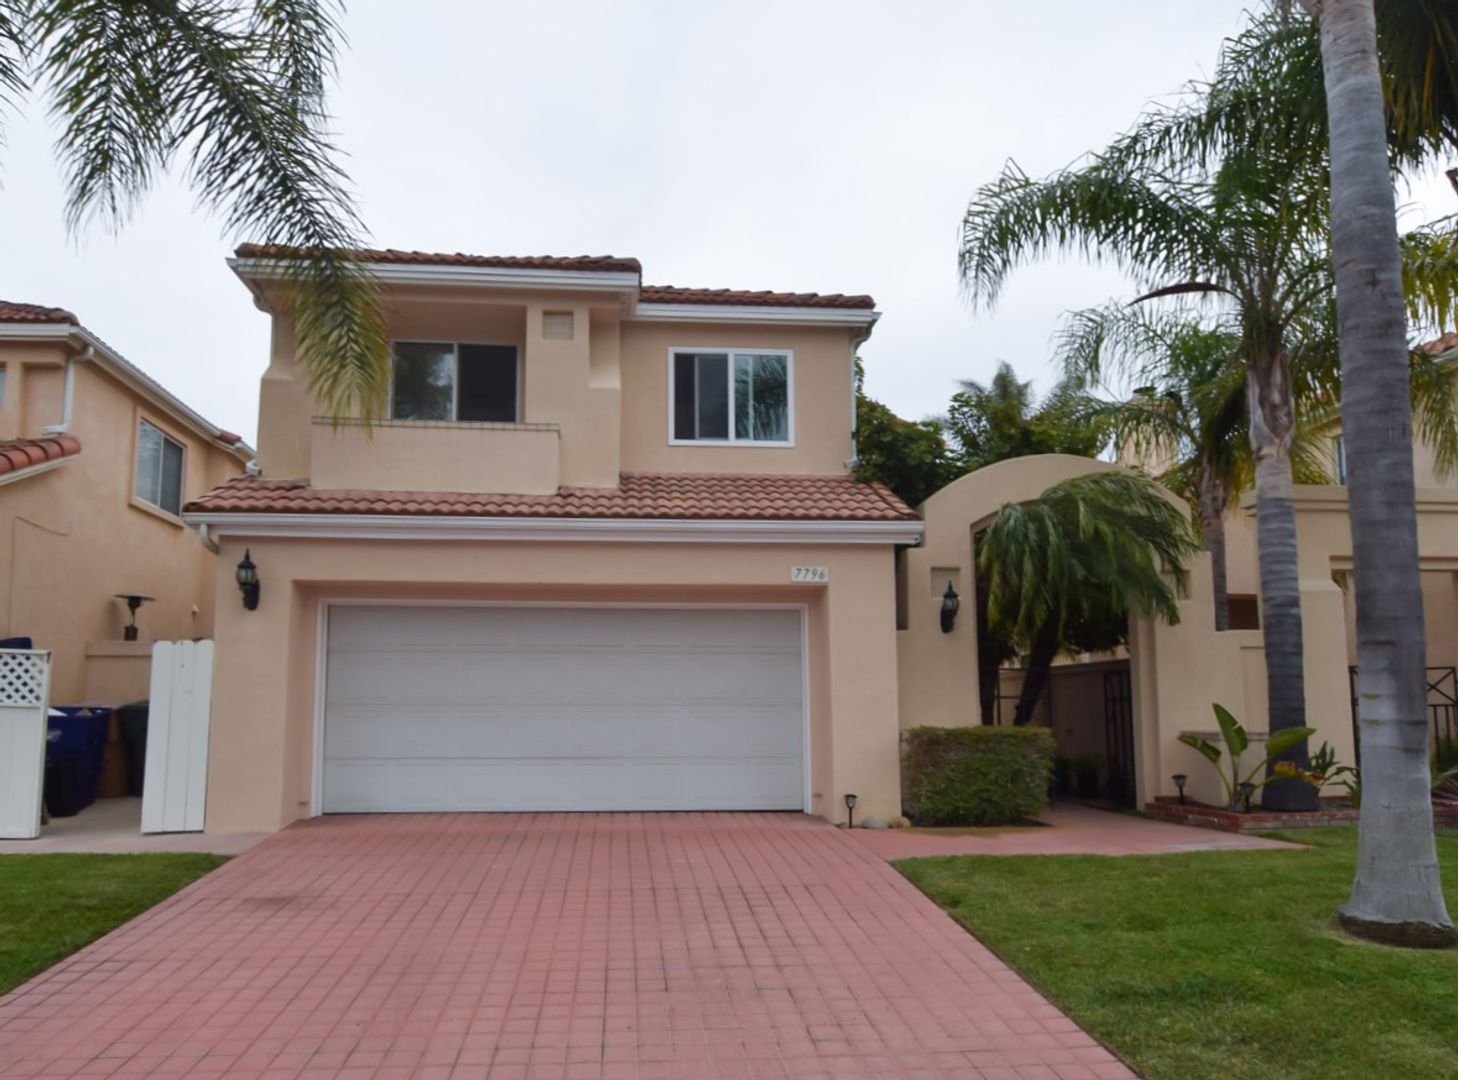 3Bed/2.5Bath Two Story Home in East Ventura